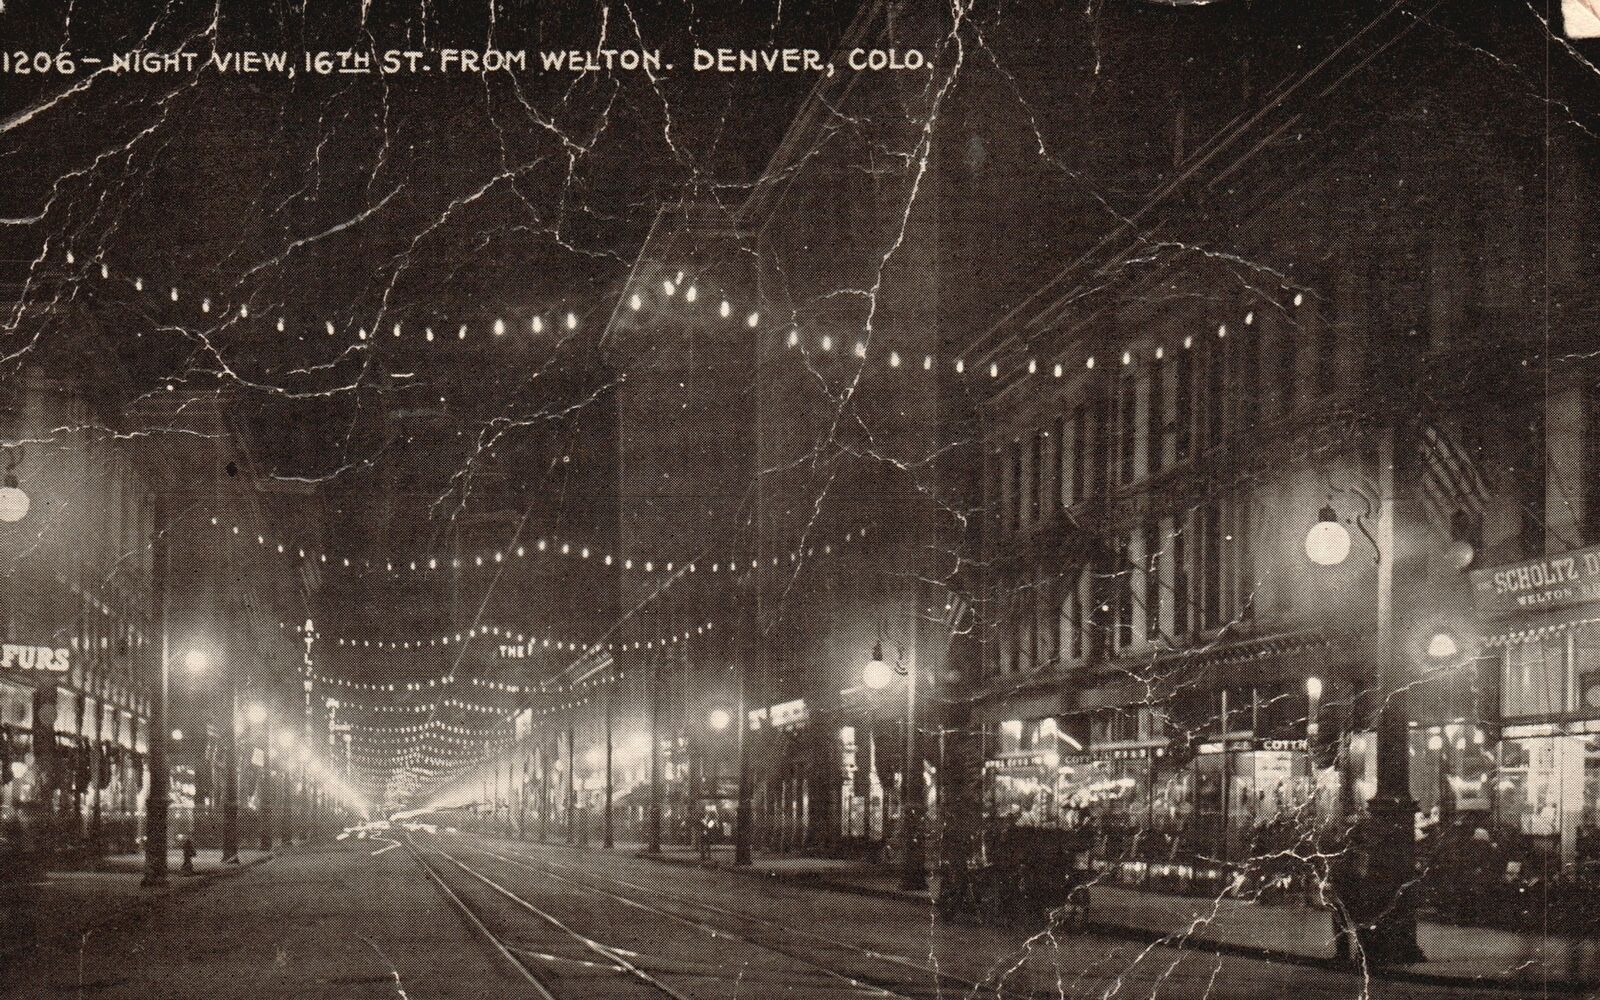 Vintage Postcard 1912 Night View 16th St. From Welton Denver Colorado Co